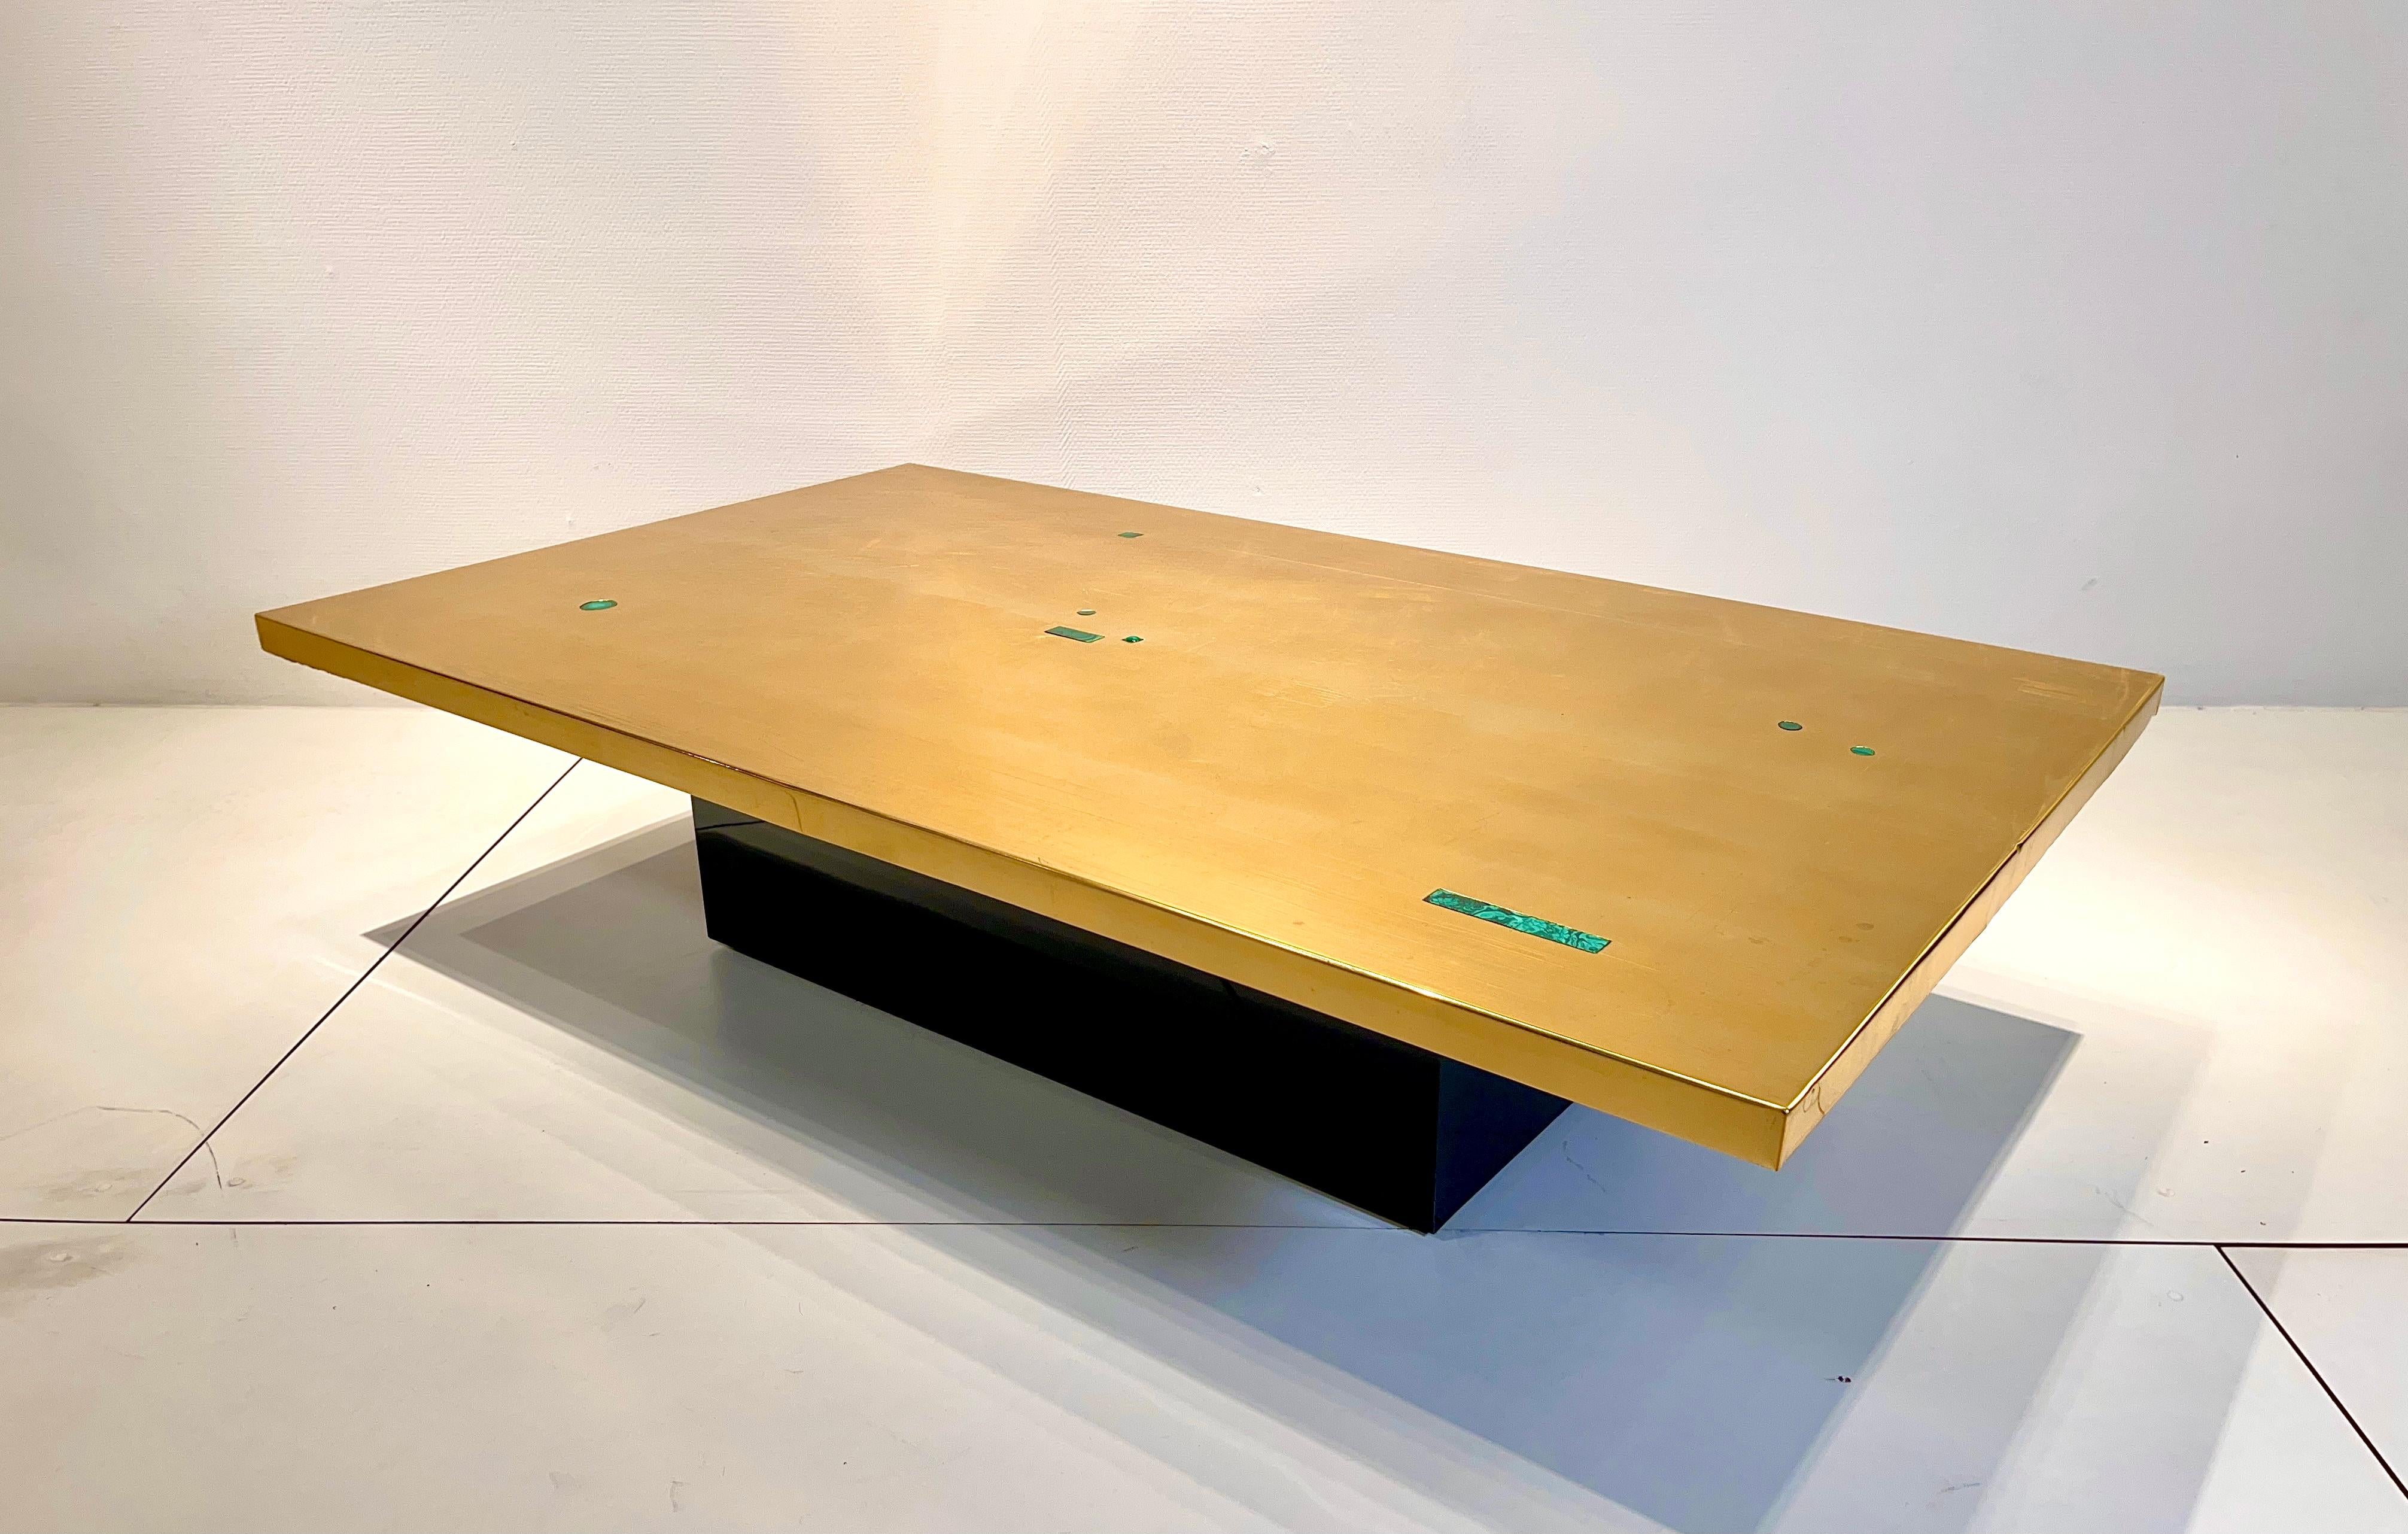 Engraved etched brass coffee table designed by Willy Daro in 1980s, with malachite stone top. This furniture has been fully restored.
Signed by the Artist.